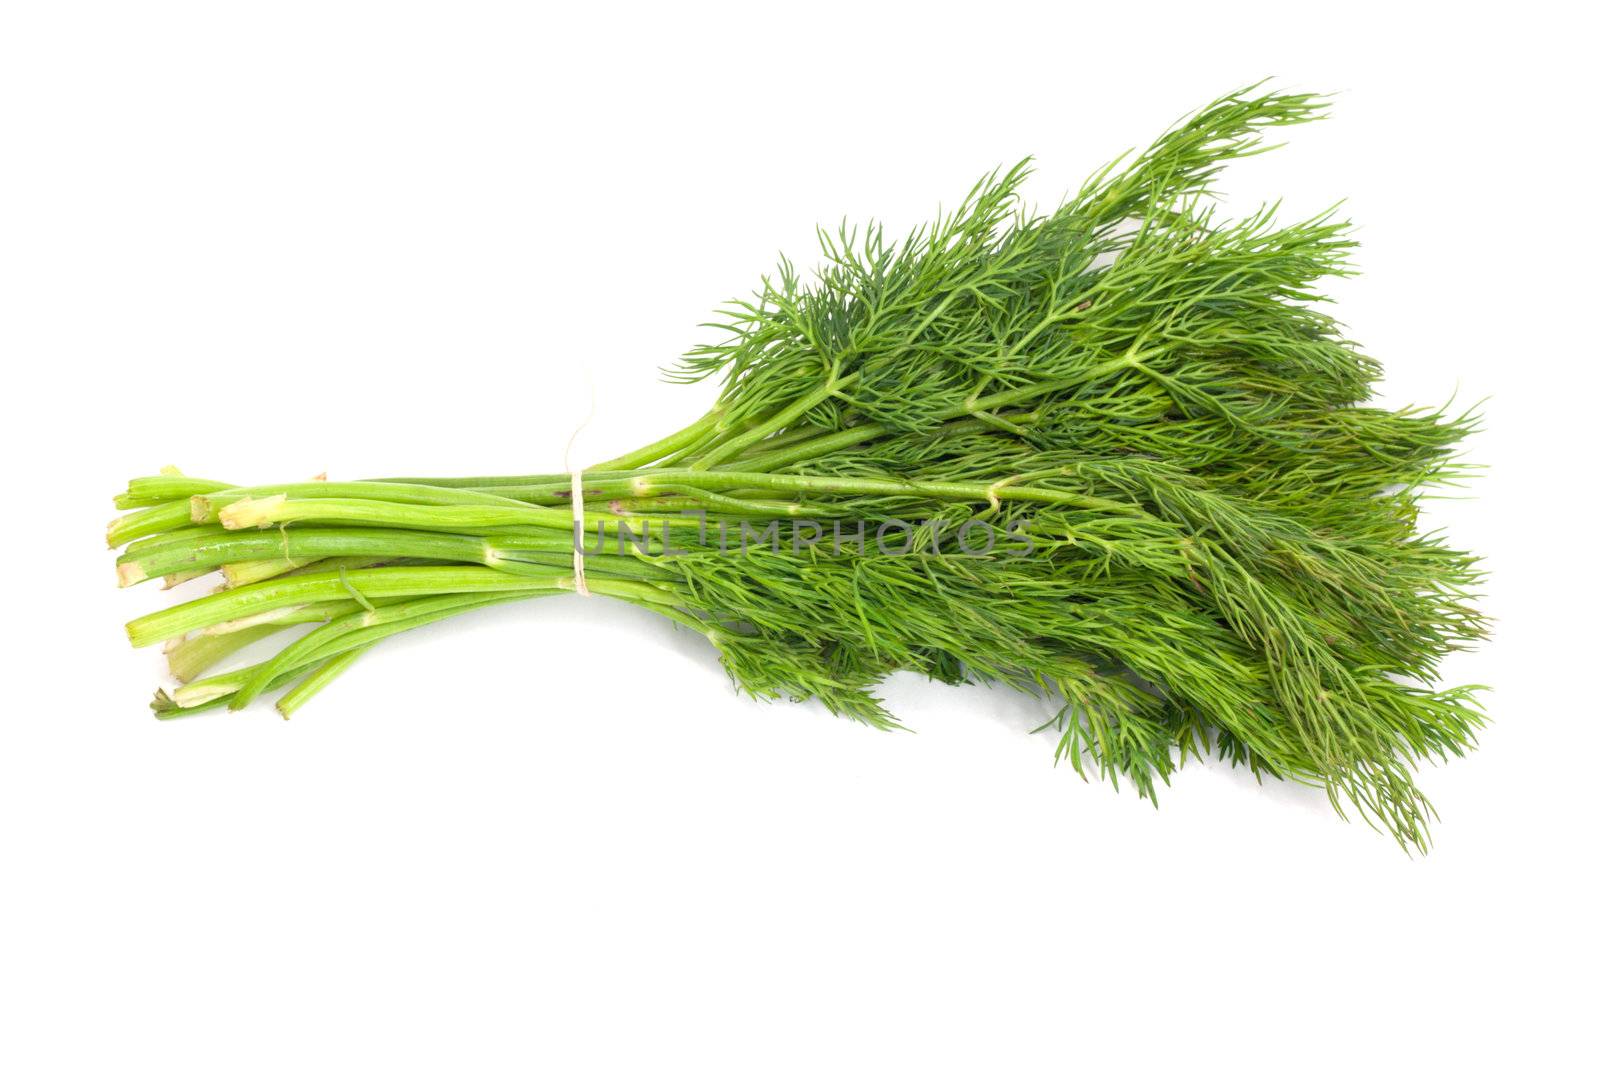 Bunch of ripe green dill isolated on white 